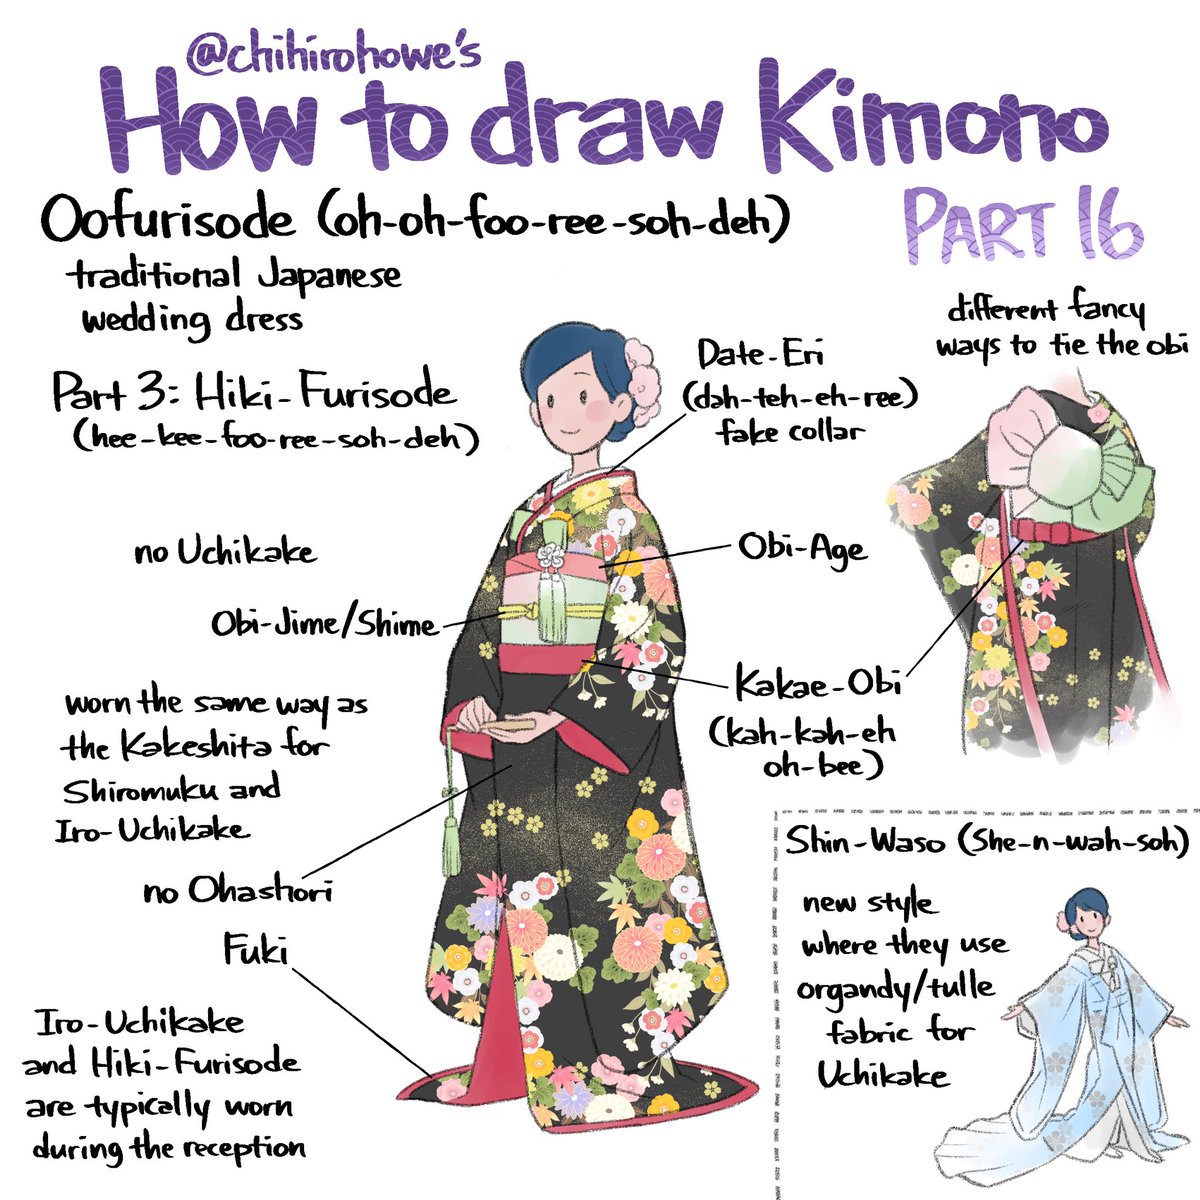  #kimono Part 16: Hiki-FurisodeThese wedding kimono can be styled with “Japanese hair” (traditional style) or “Western hair” (typical updo).If the hair is long enough it can be styled into the Japanese hair by itself, but if it’s short “half wig” or “whole wig” can be used.